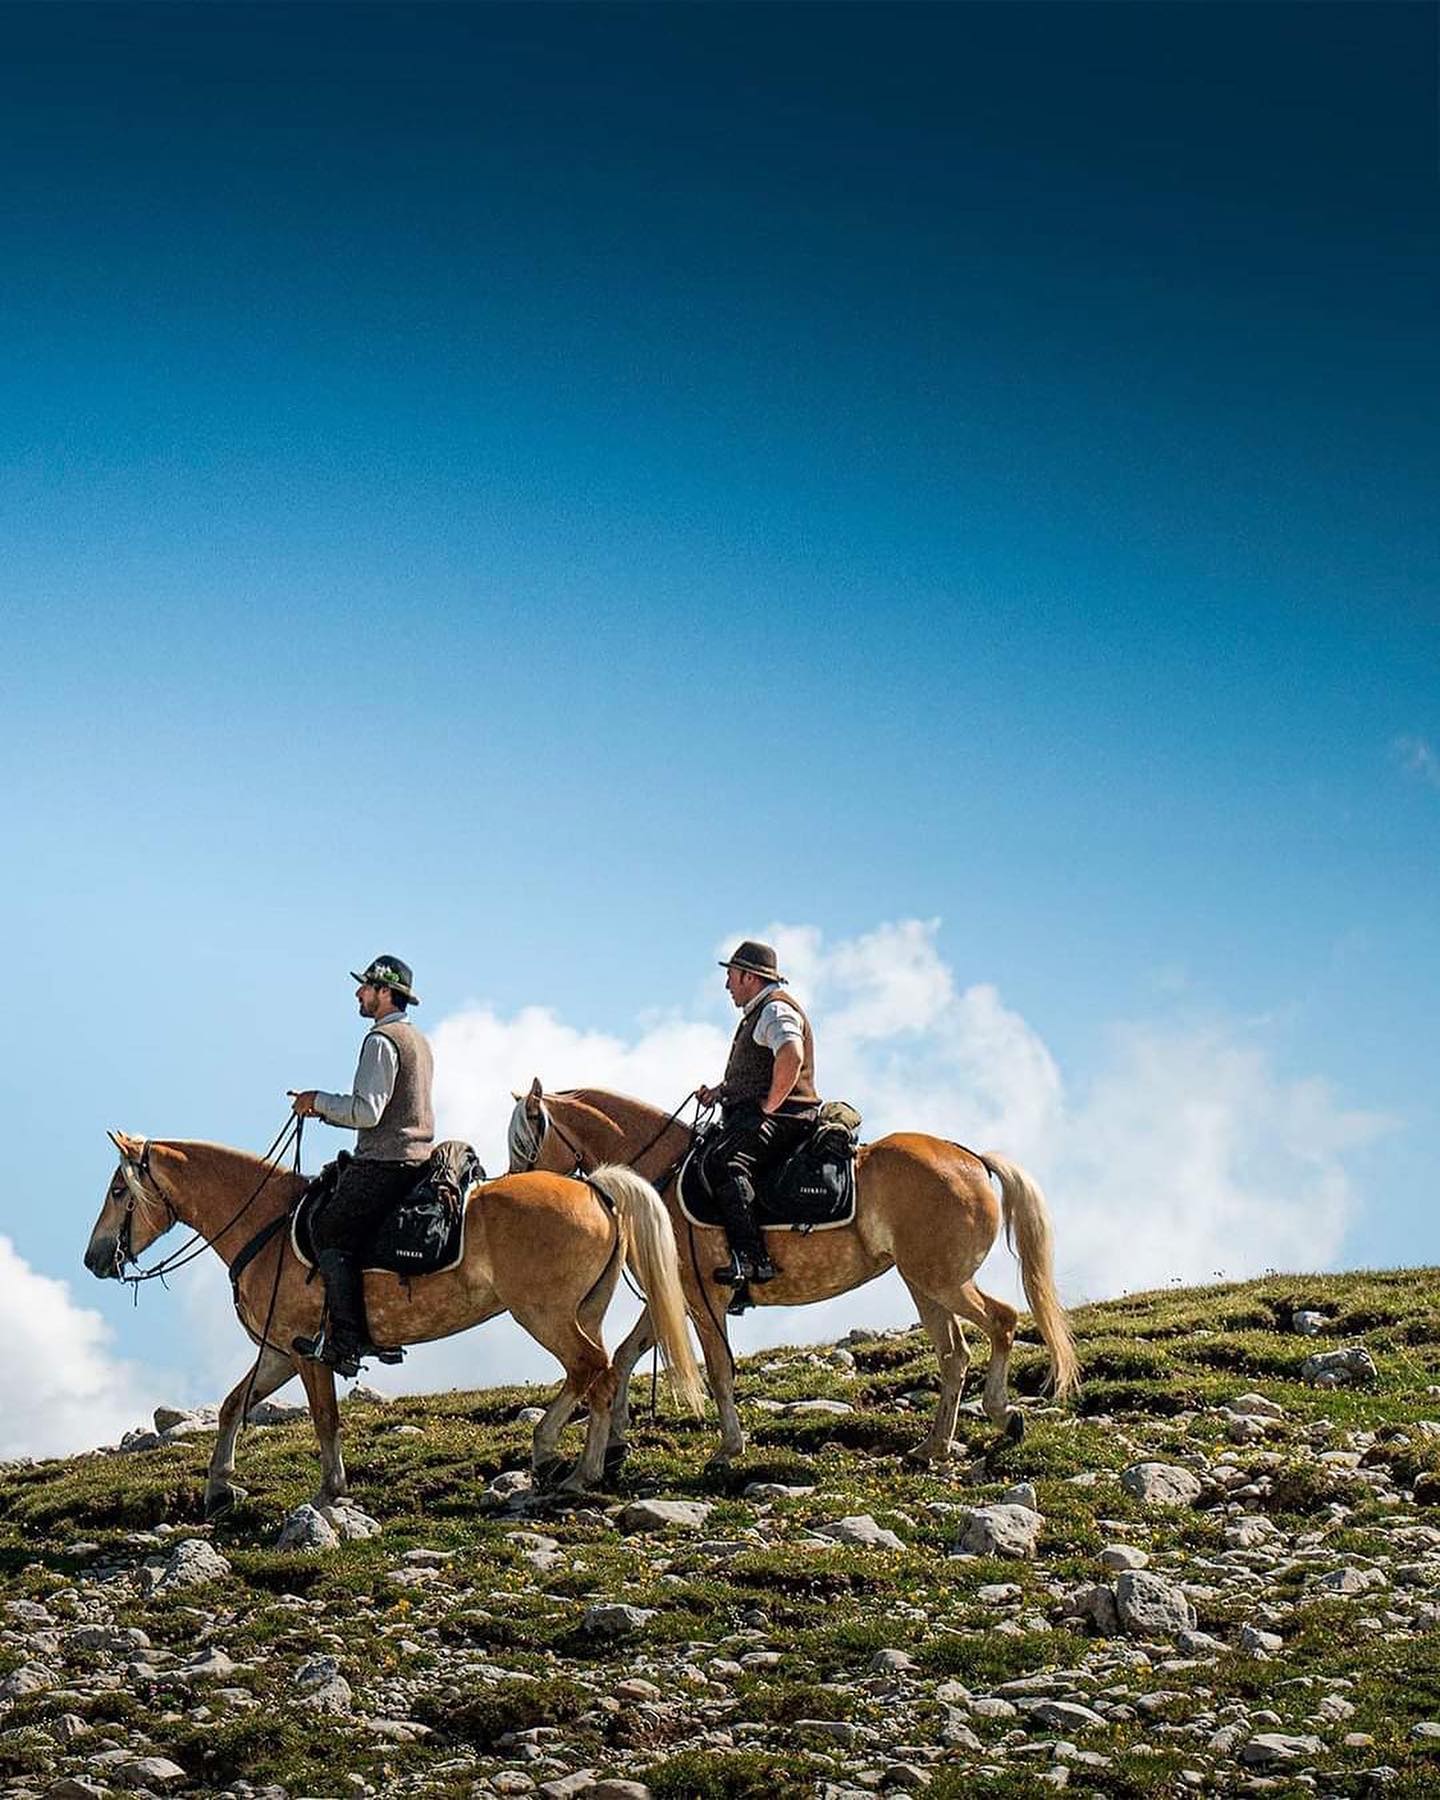 A booking platform for equestrian holidays and experiences, the first of its kind